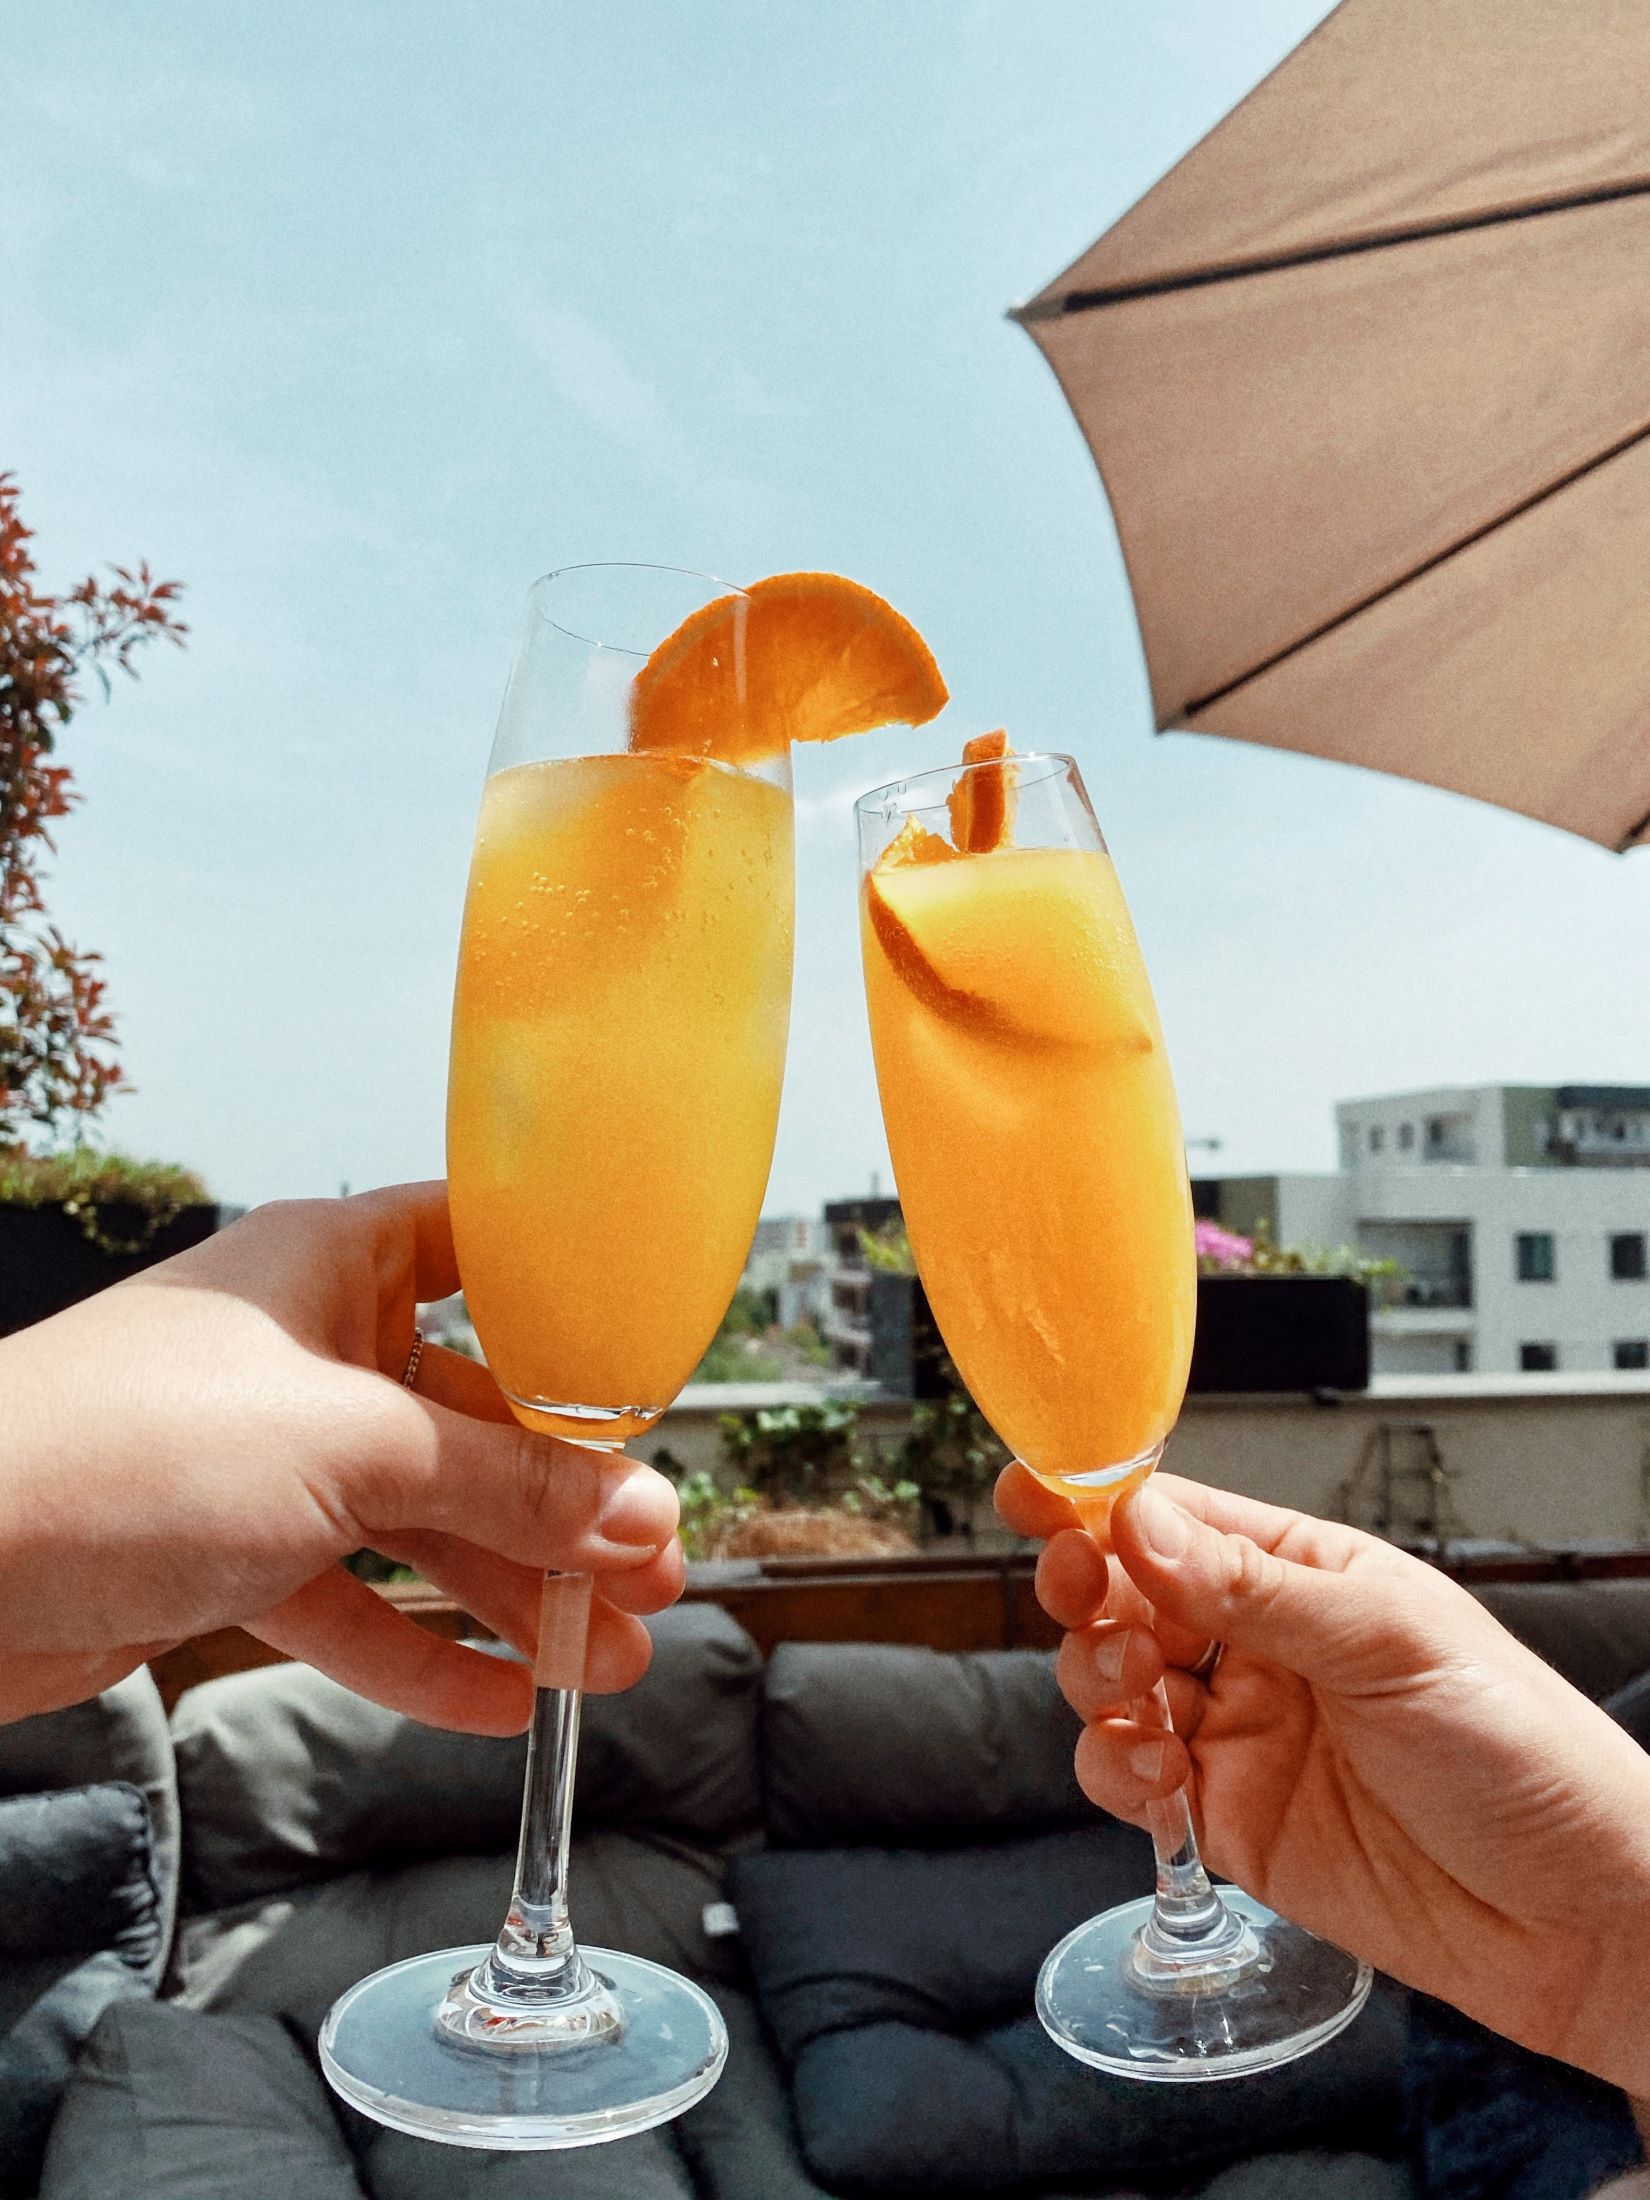 An image of two mimosas.